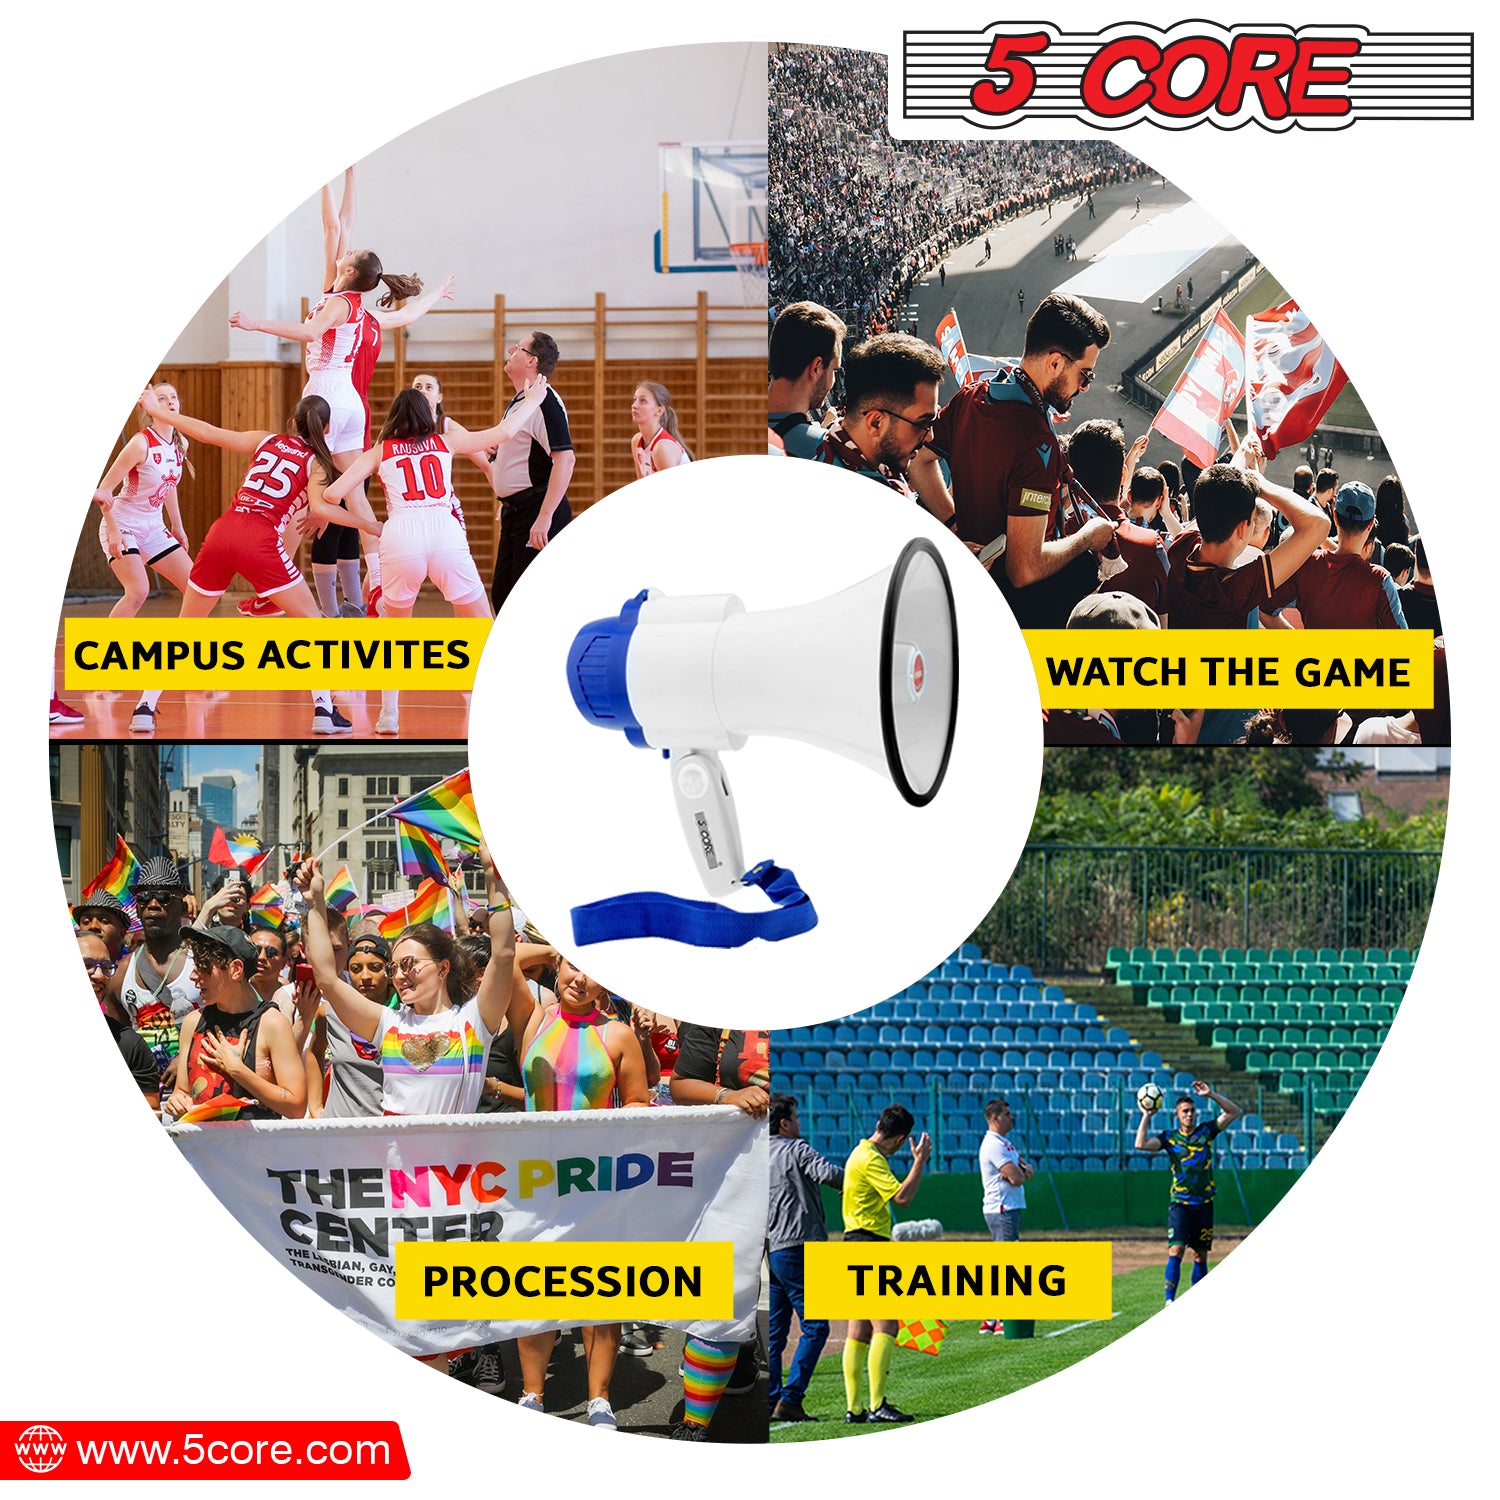 ull Horn Speaker for sporting events, parties, lifeguards, event organizers, and more.